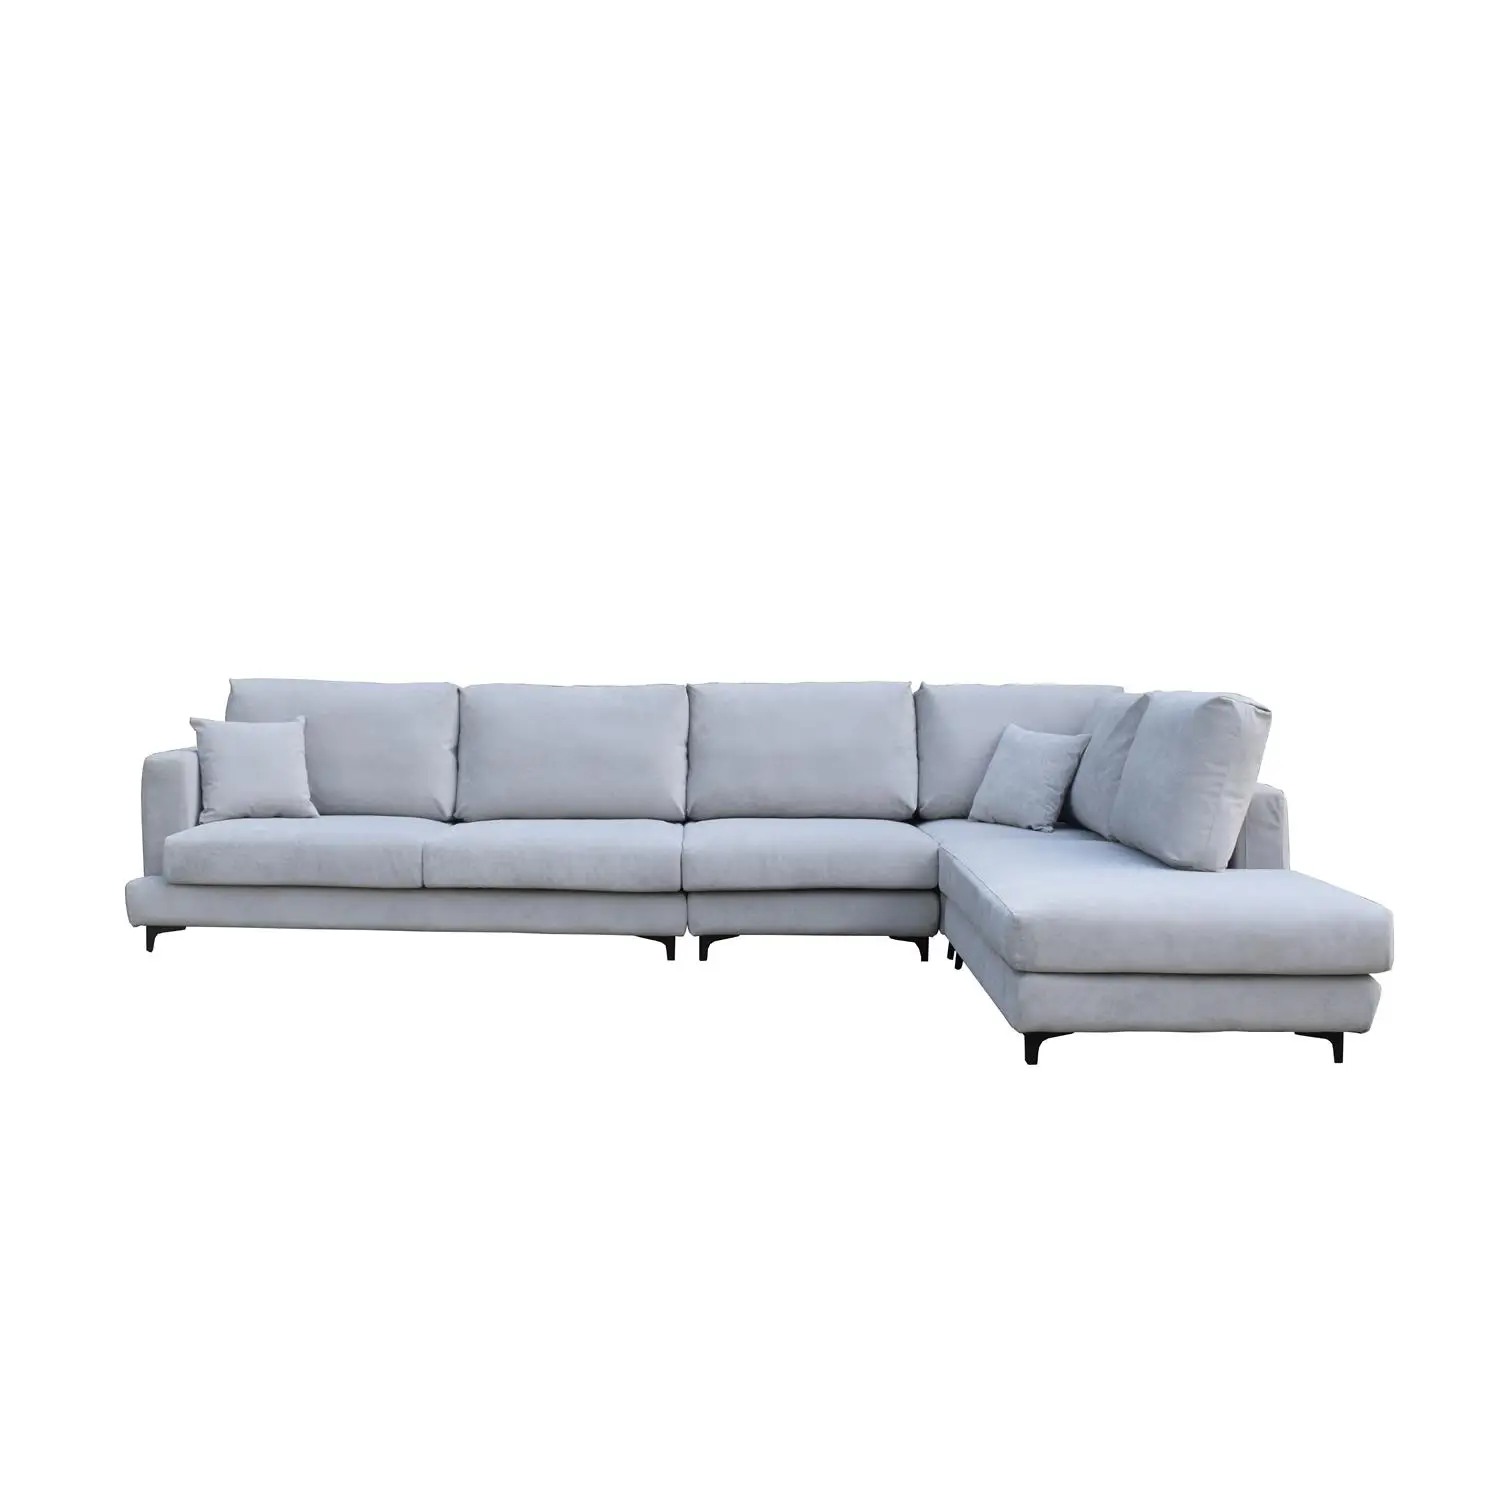 Waterproof fabric living room sofas?old?  grey fabric furniture L sofa set for home use (1600367927721)